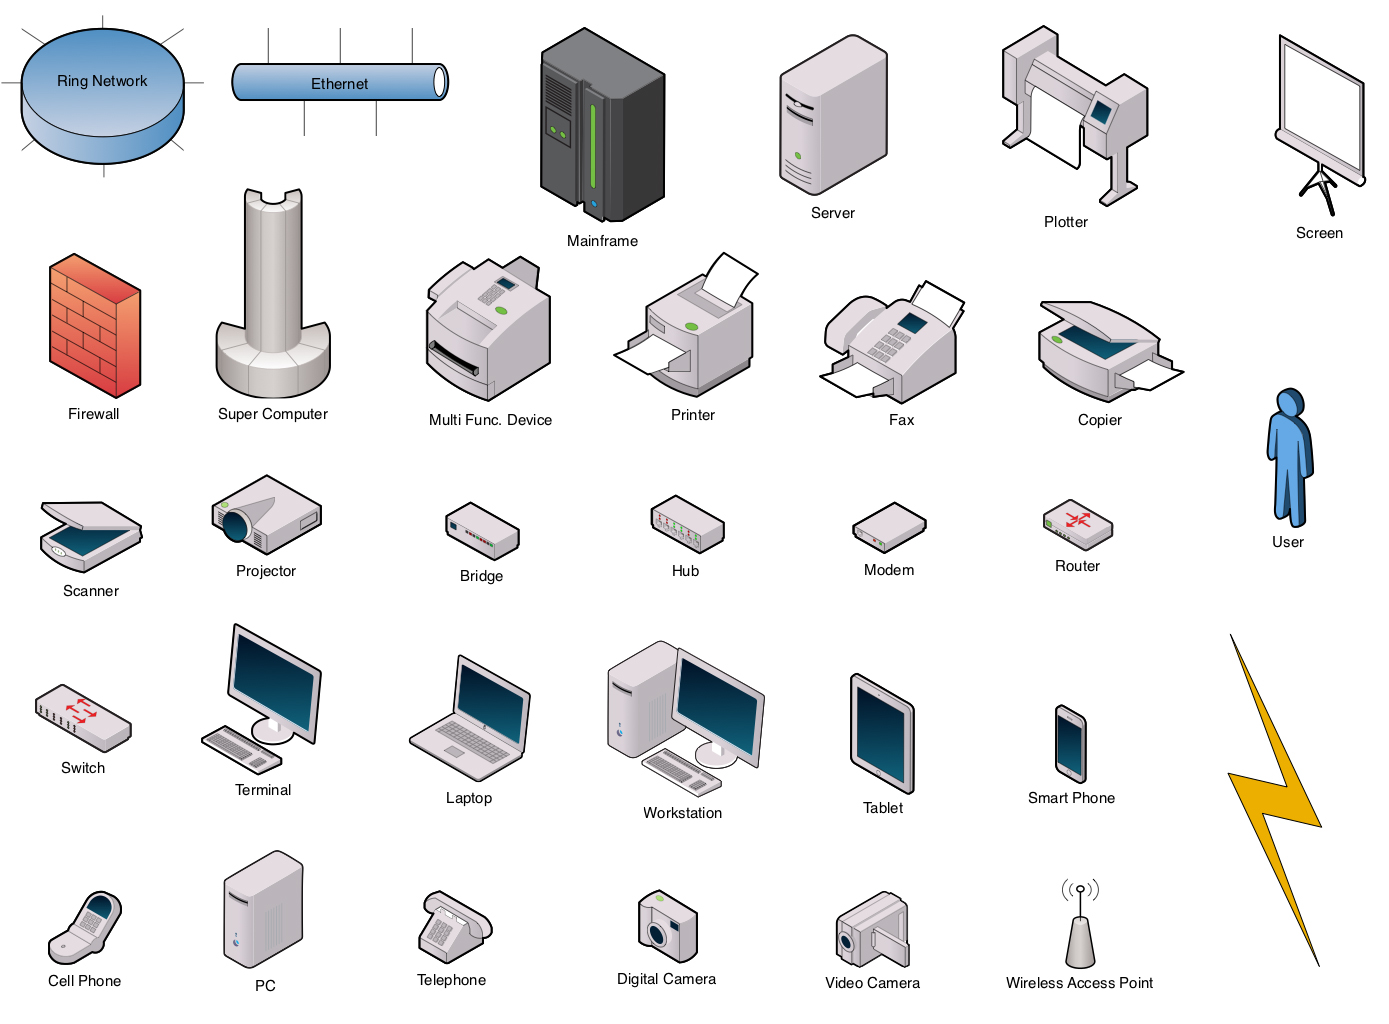 A breakdown of the various parts of a network, each part (user, PC, modem, server, etc.) illustrated in the style of a 90s computer icon.